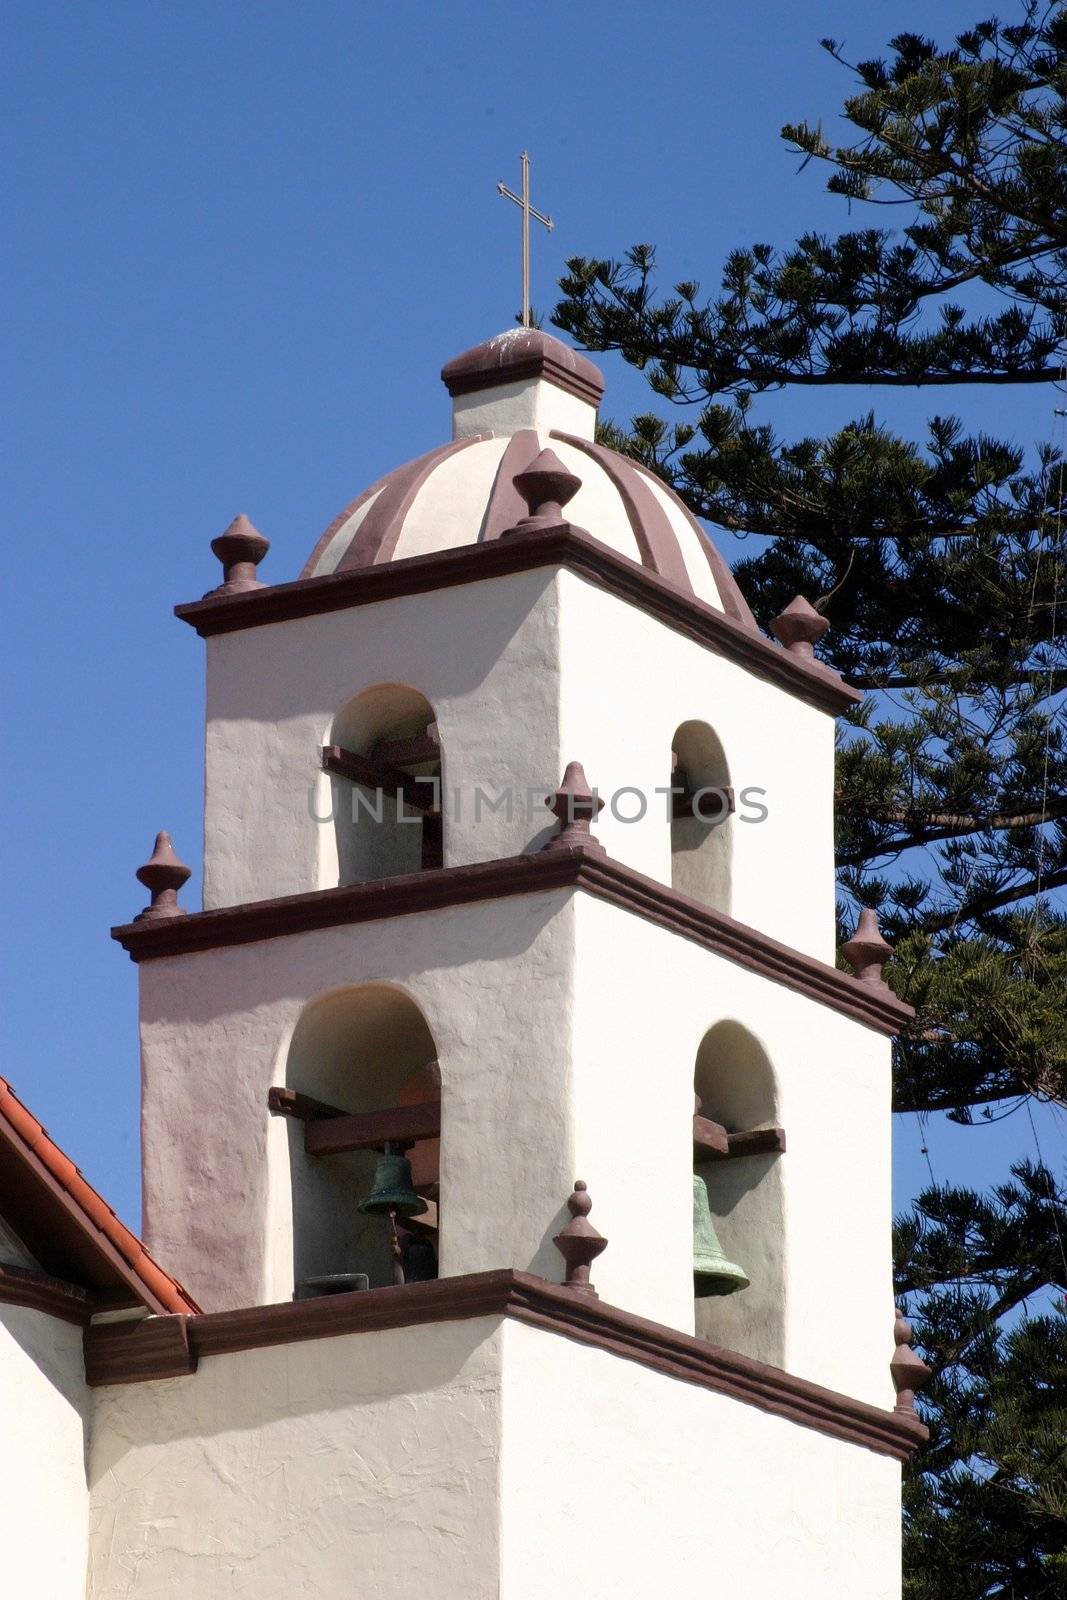 The bell tower of the San Buenaventura Mission in Ventura Calefornia.